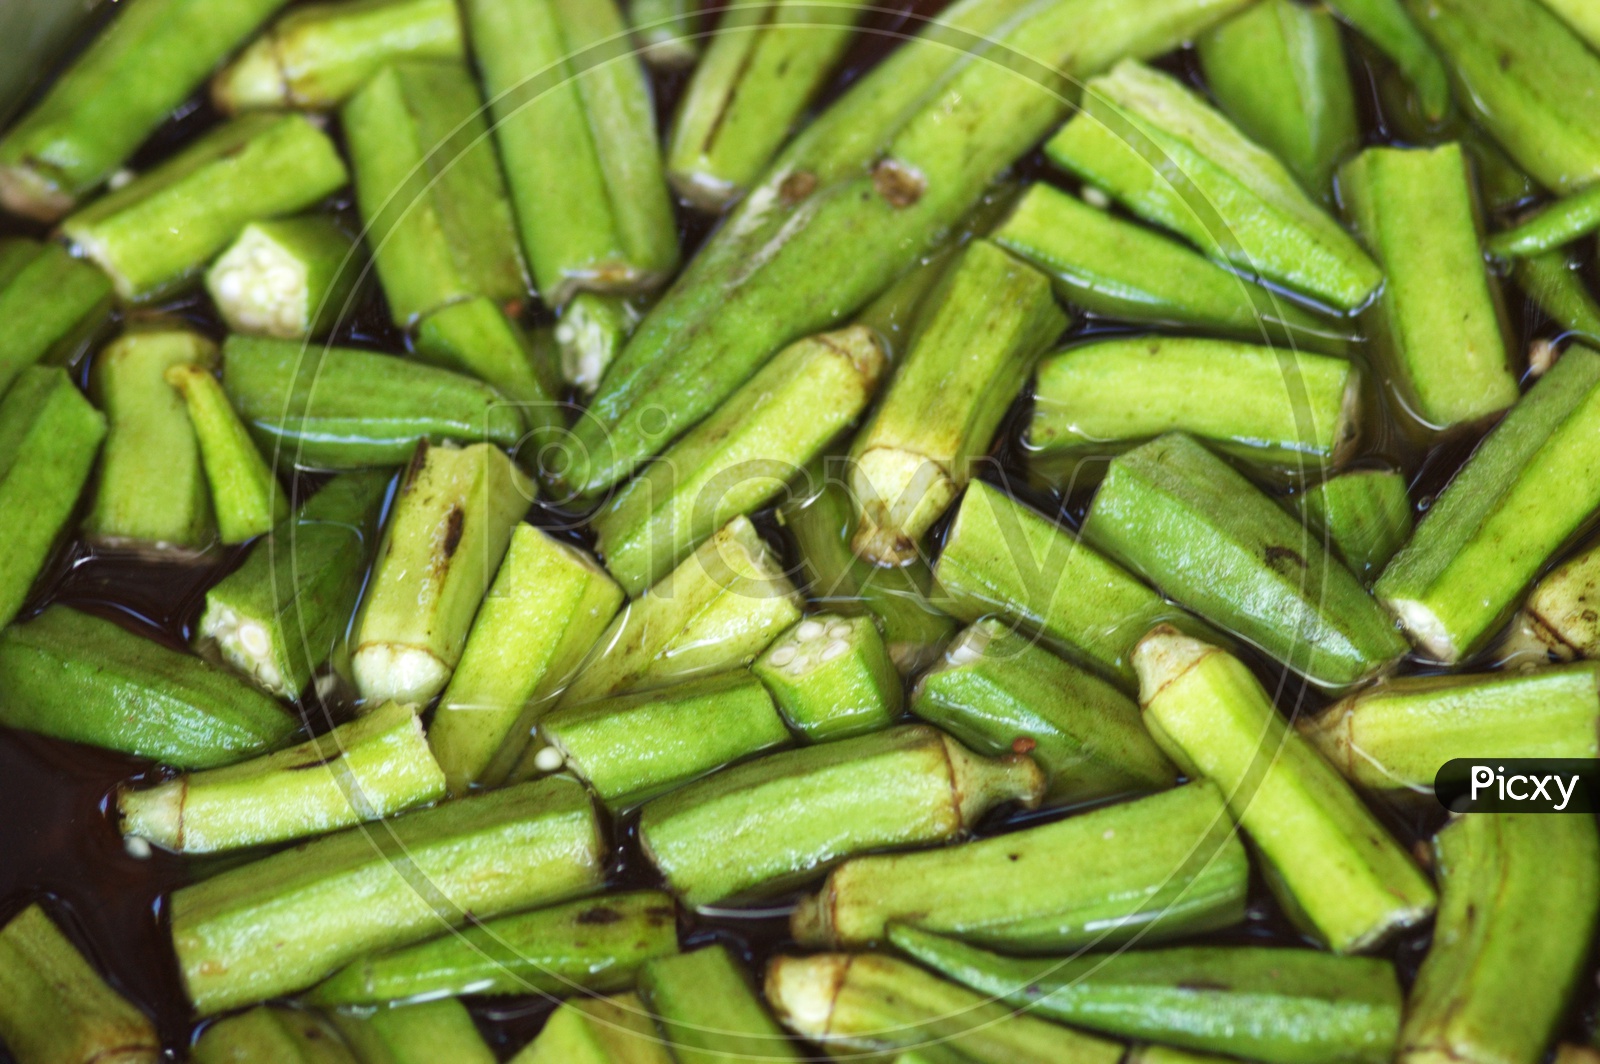 A bunch of okra cut into pieces